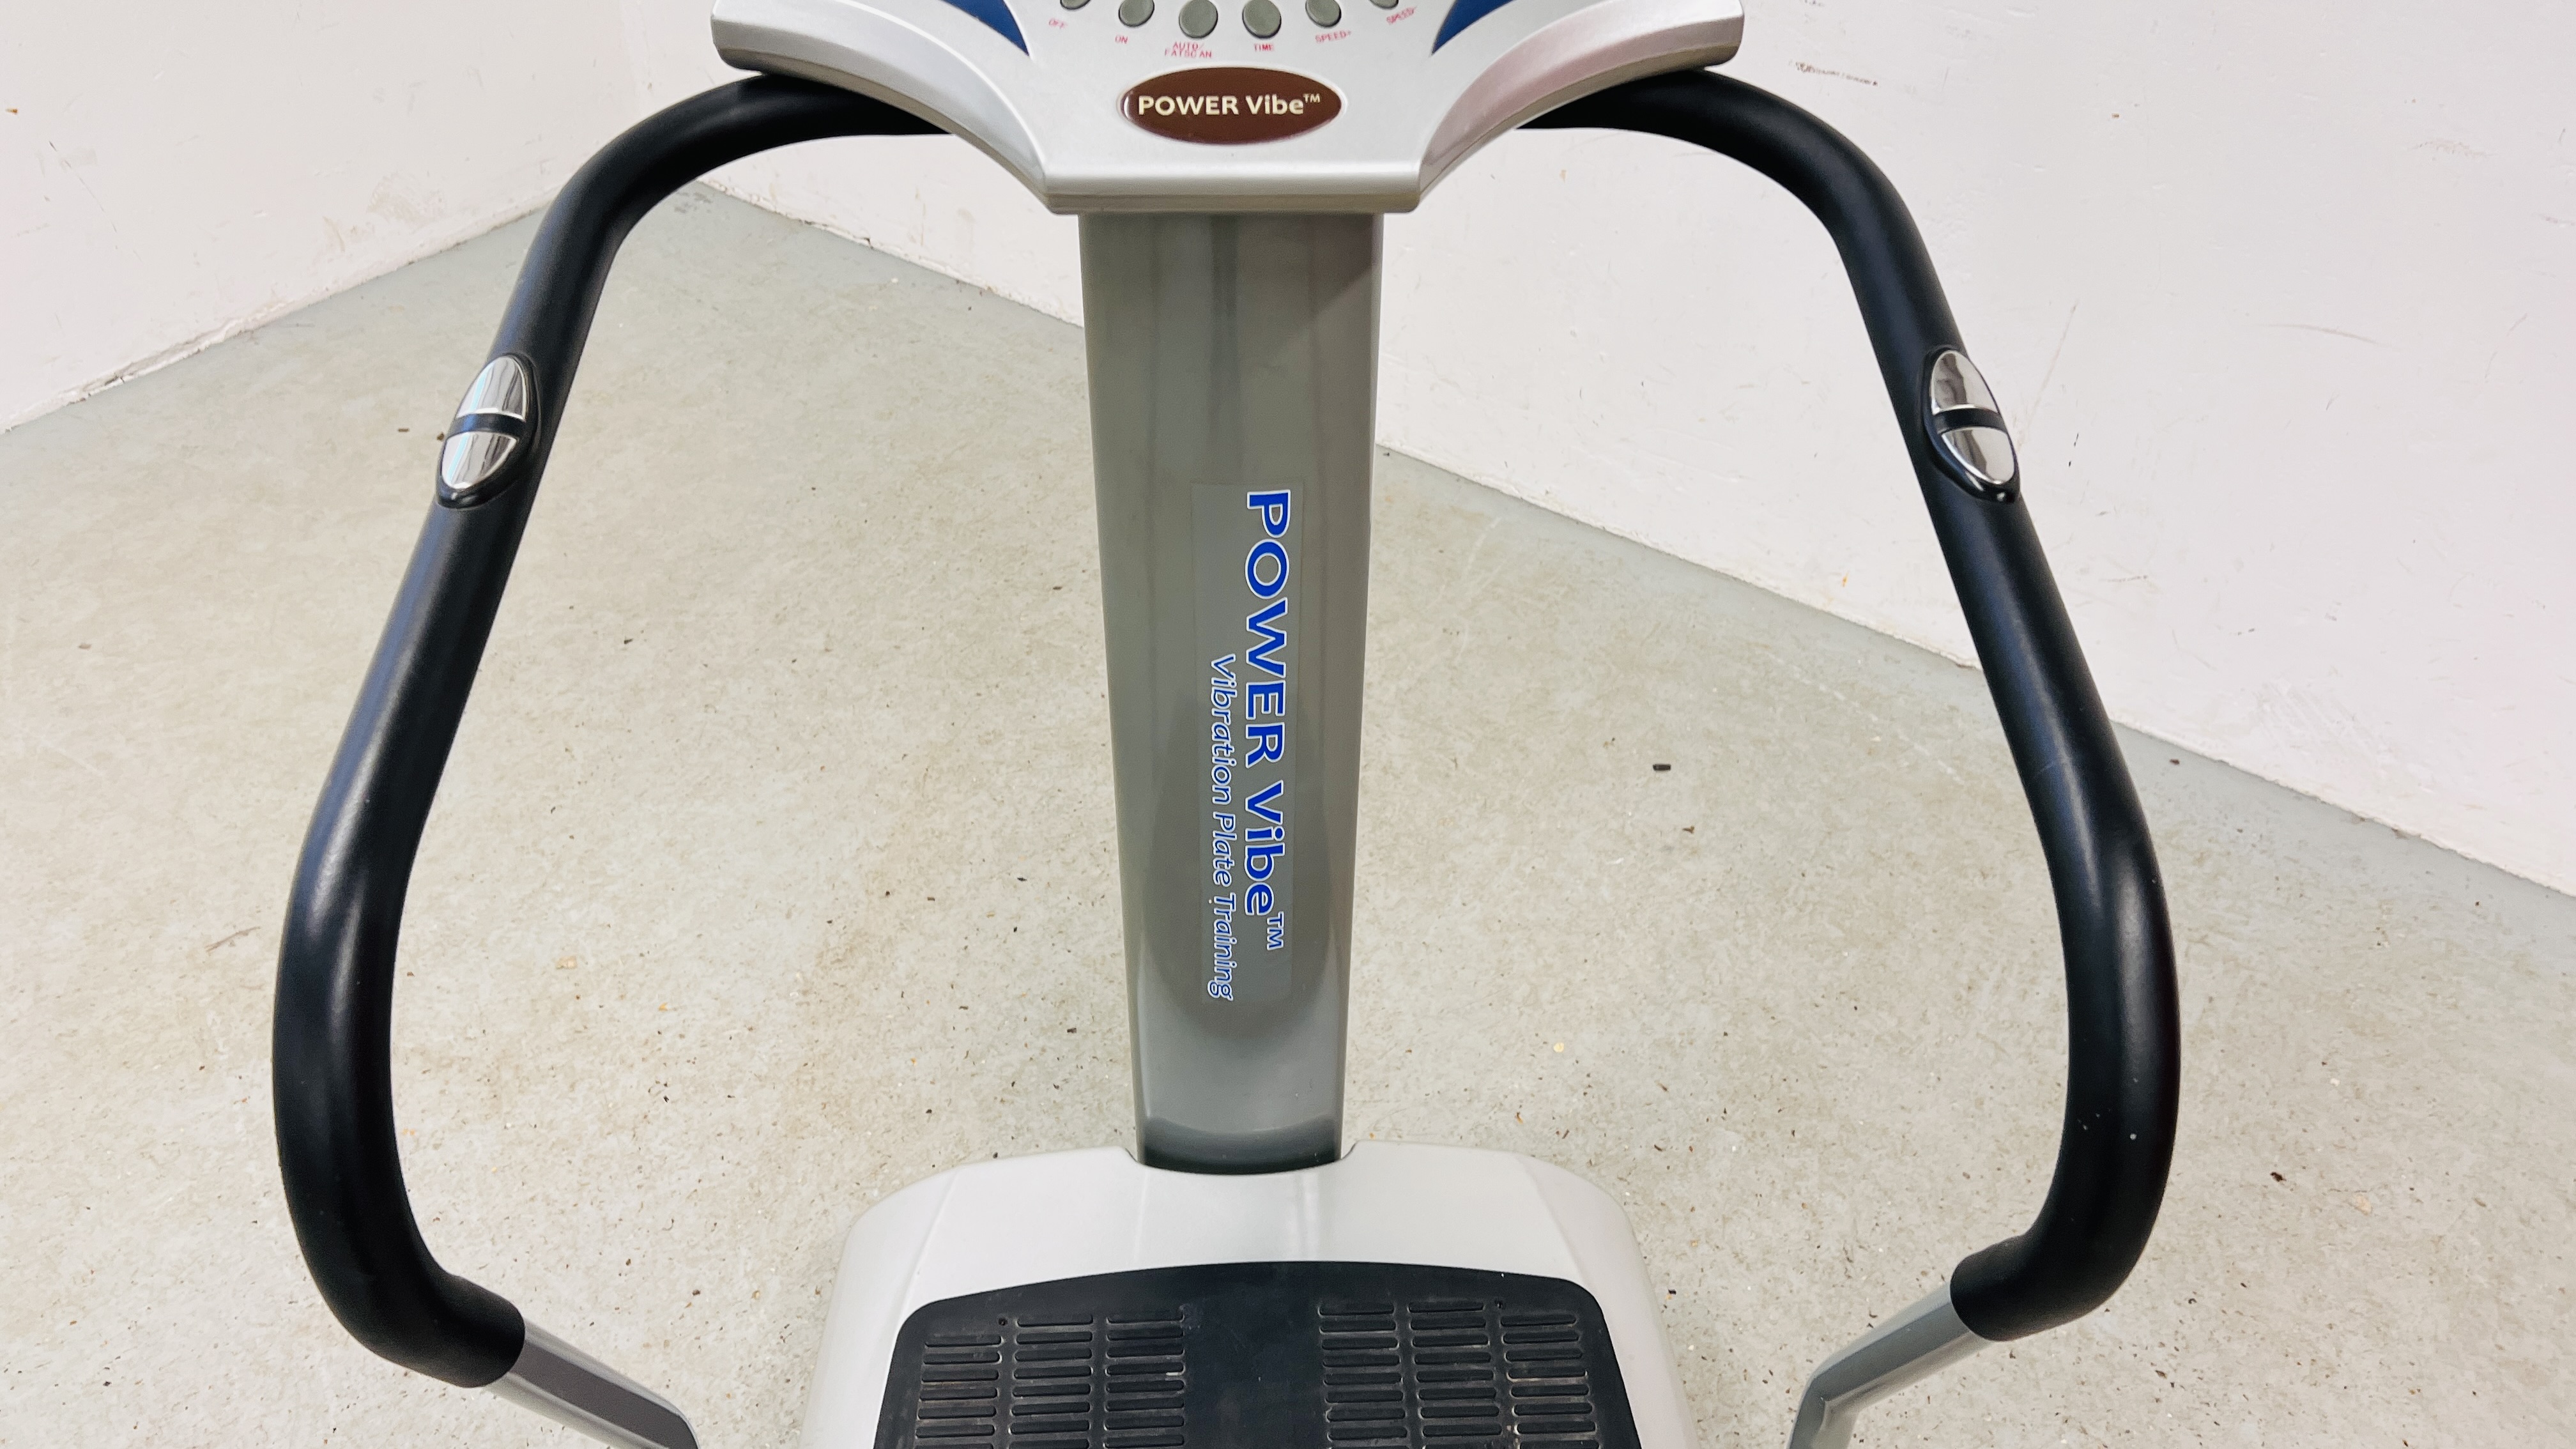 A POWER VIBE VIBRATION EXERCISE PLATE MODEL ORBUS DF2000 - SOLD AS SEEN. - Image 4 of 5